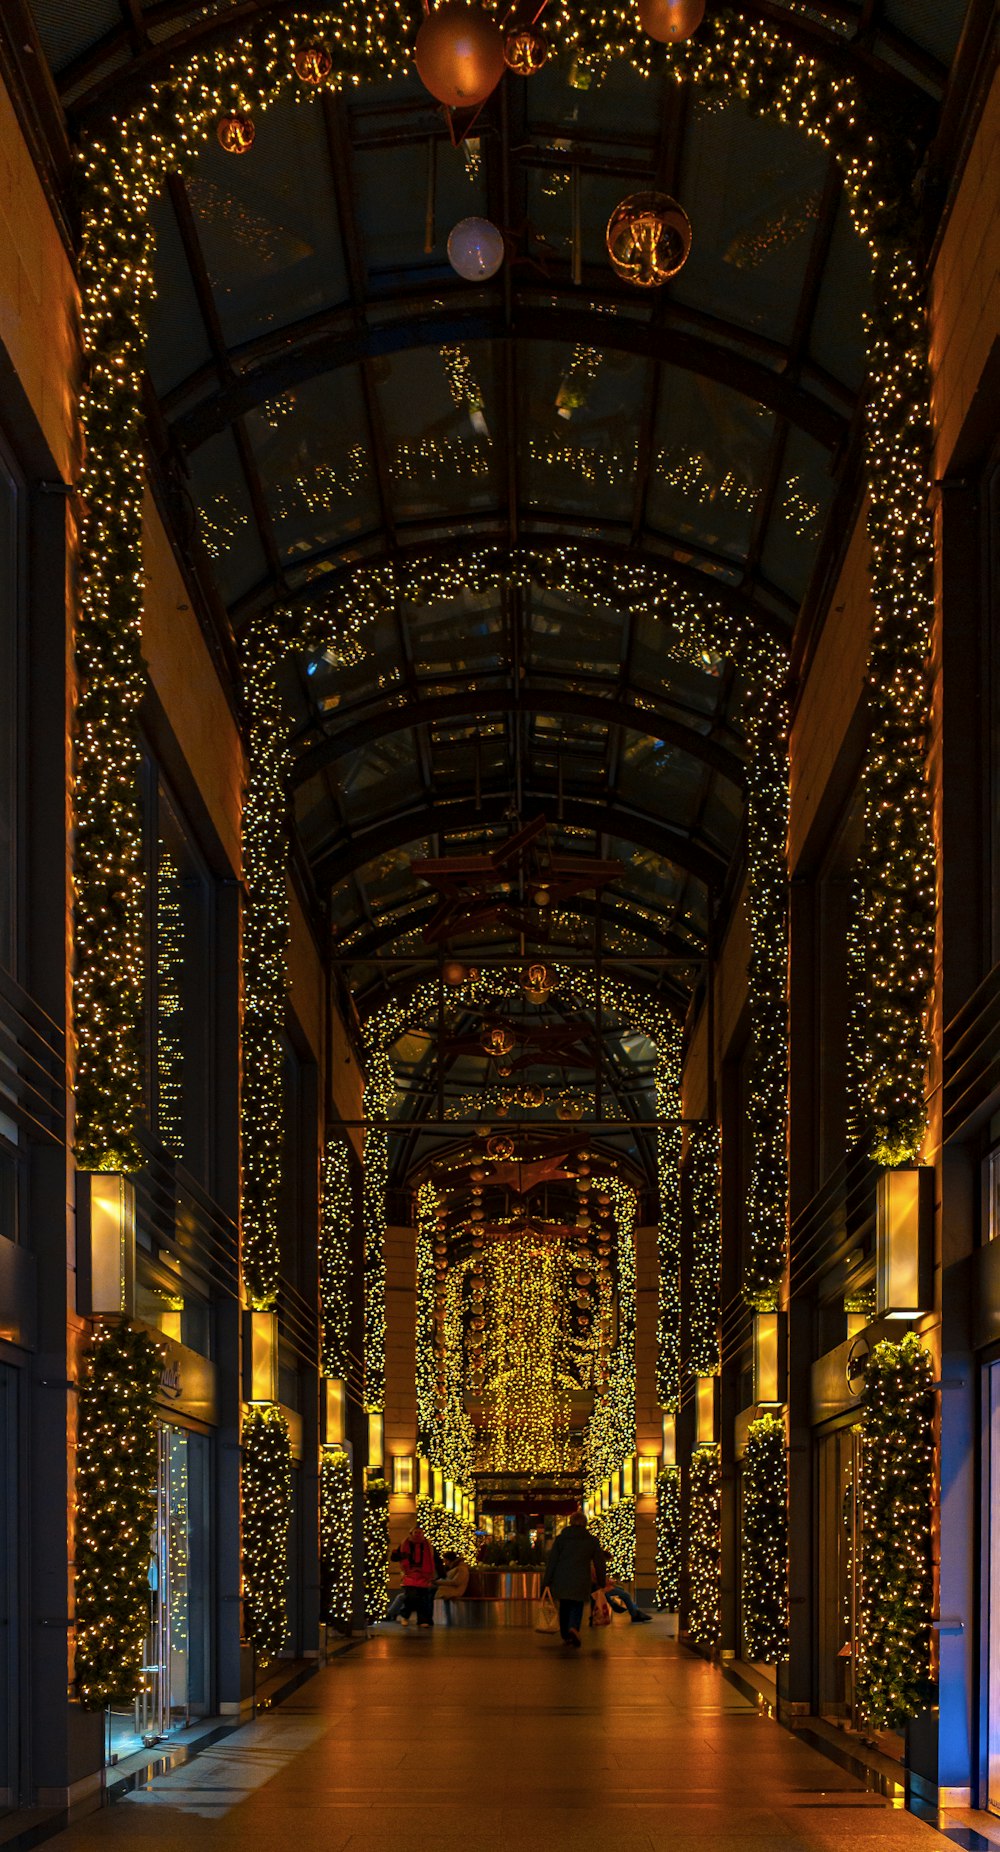 a long hallway with lights and decorations on the ceiling